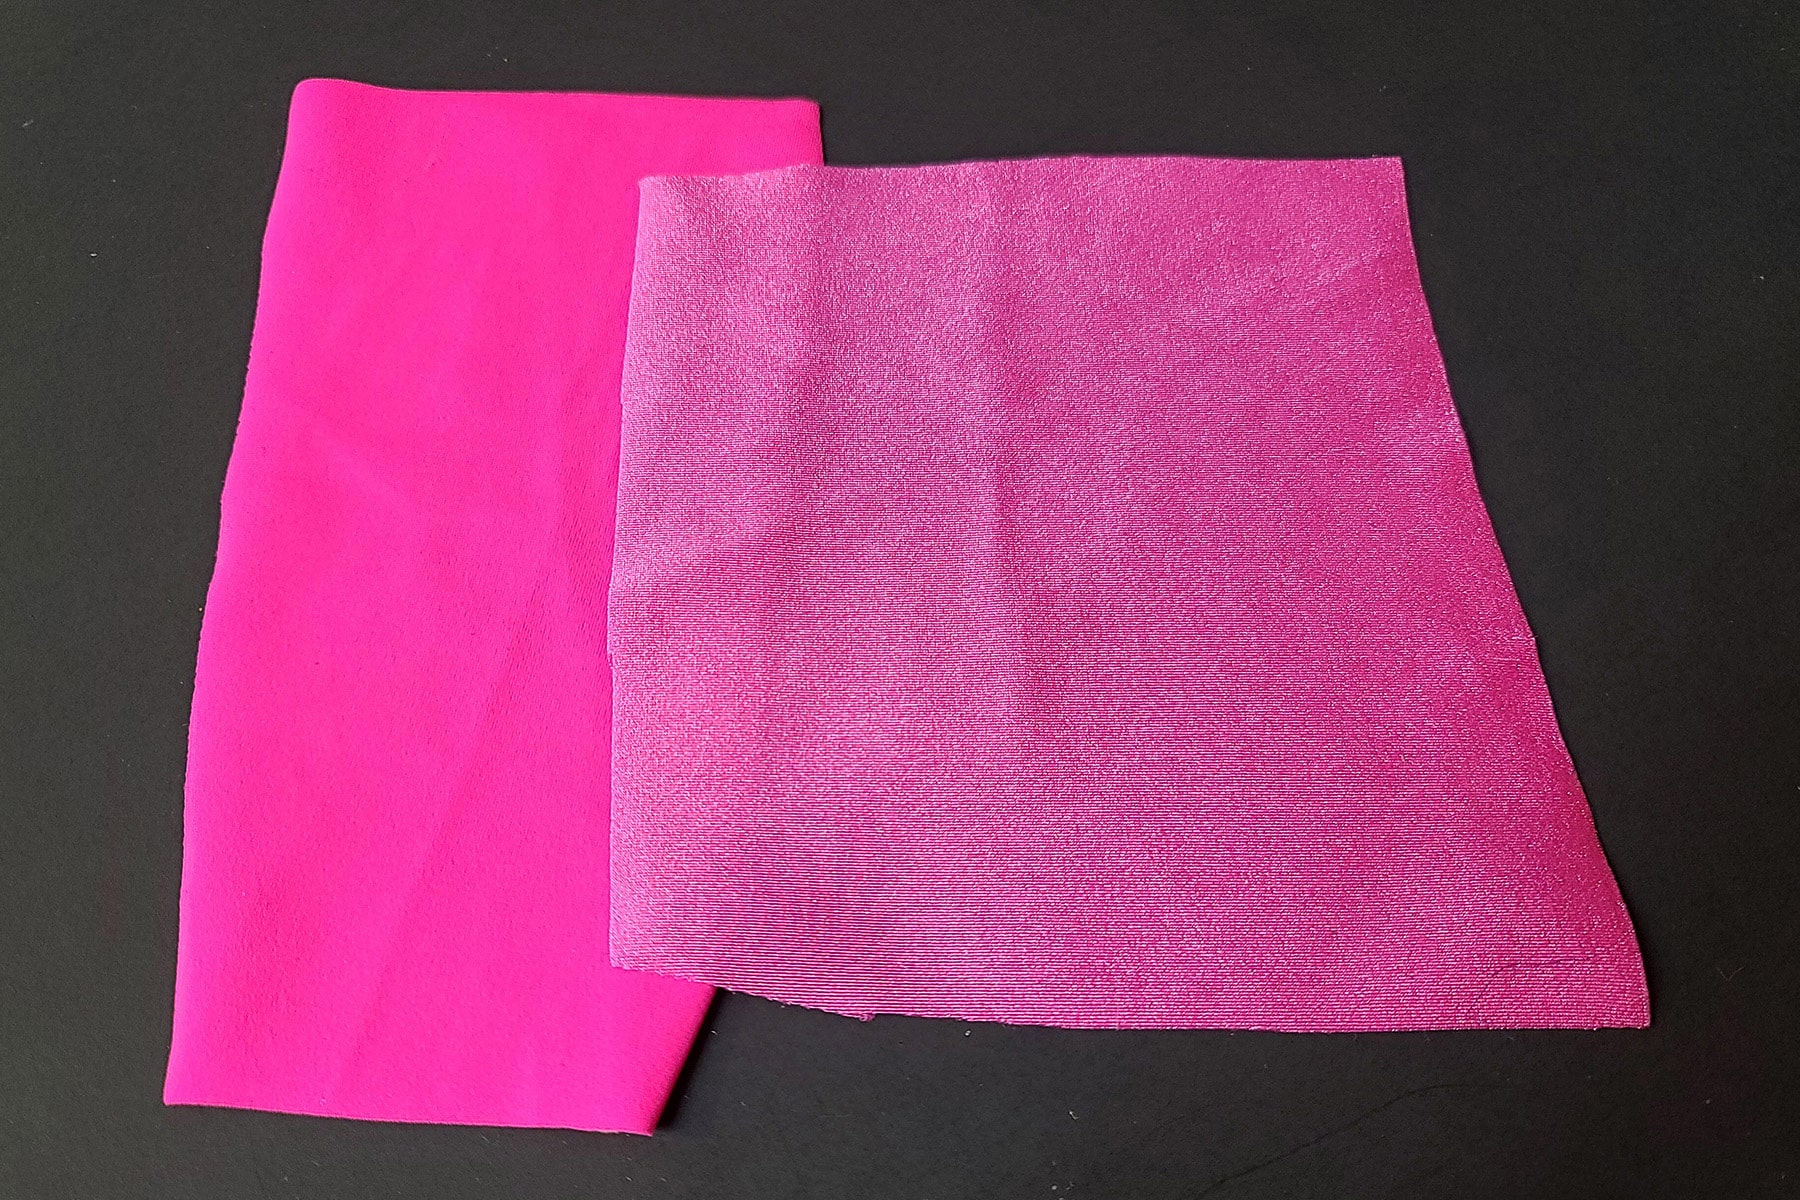 A 2 part image showing a piece of shiny pink spandex and a piece of matte pink Lycra®.